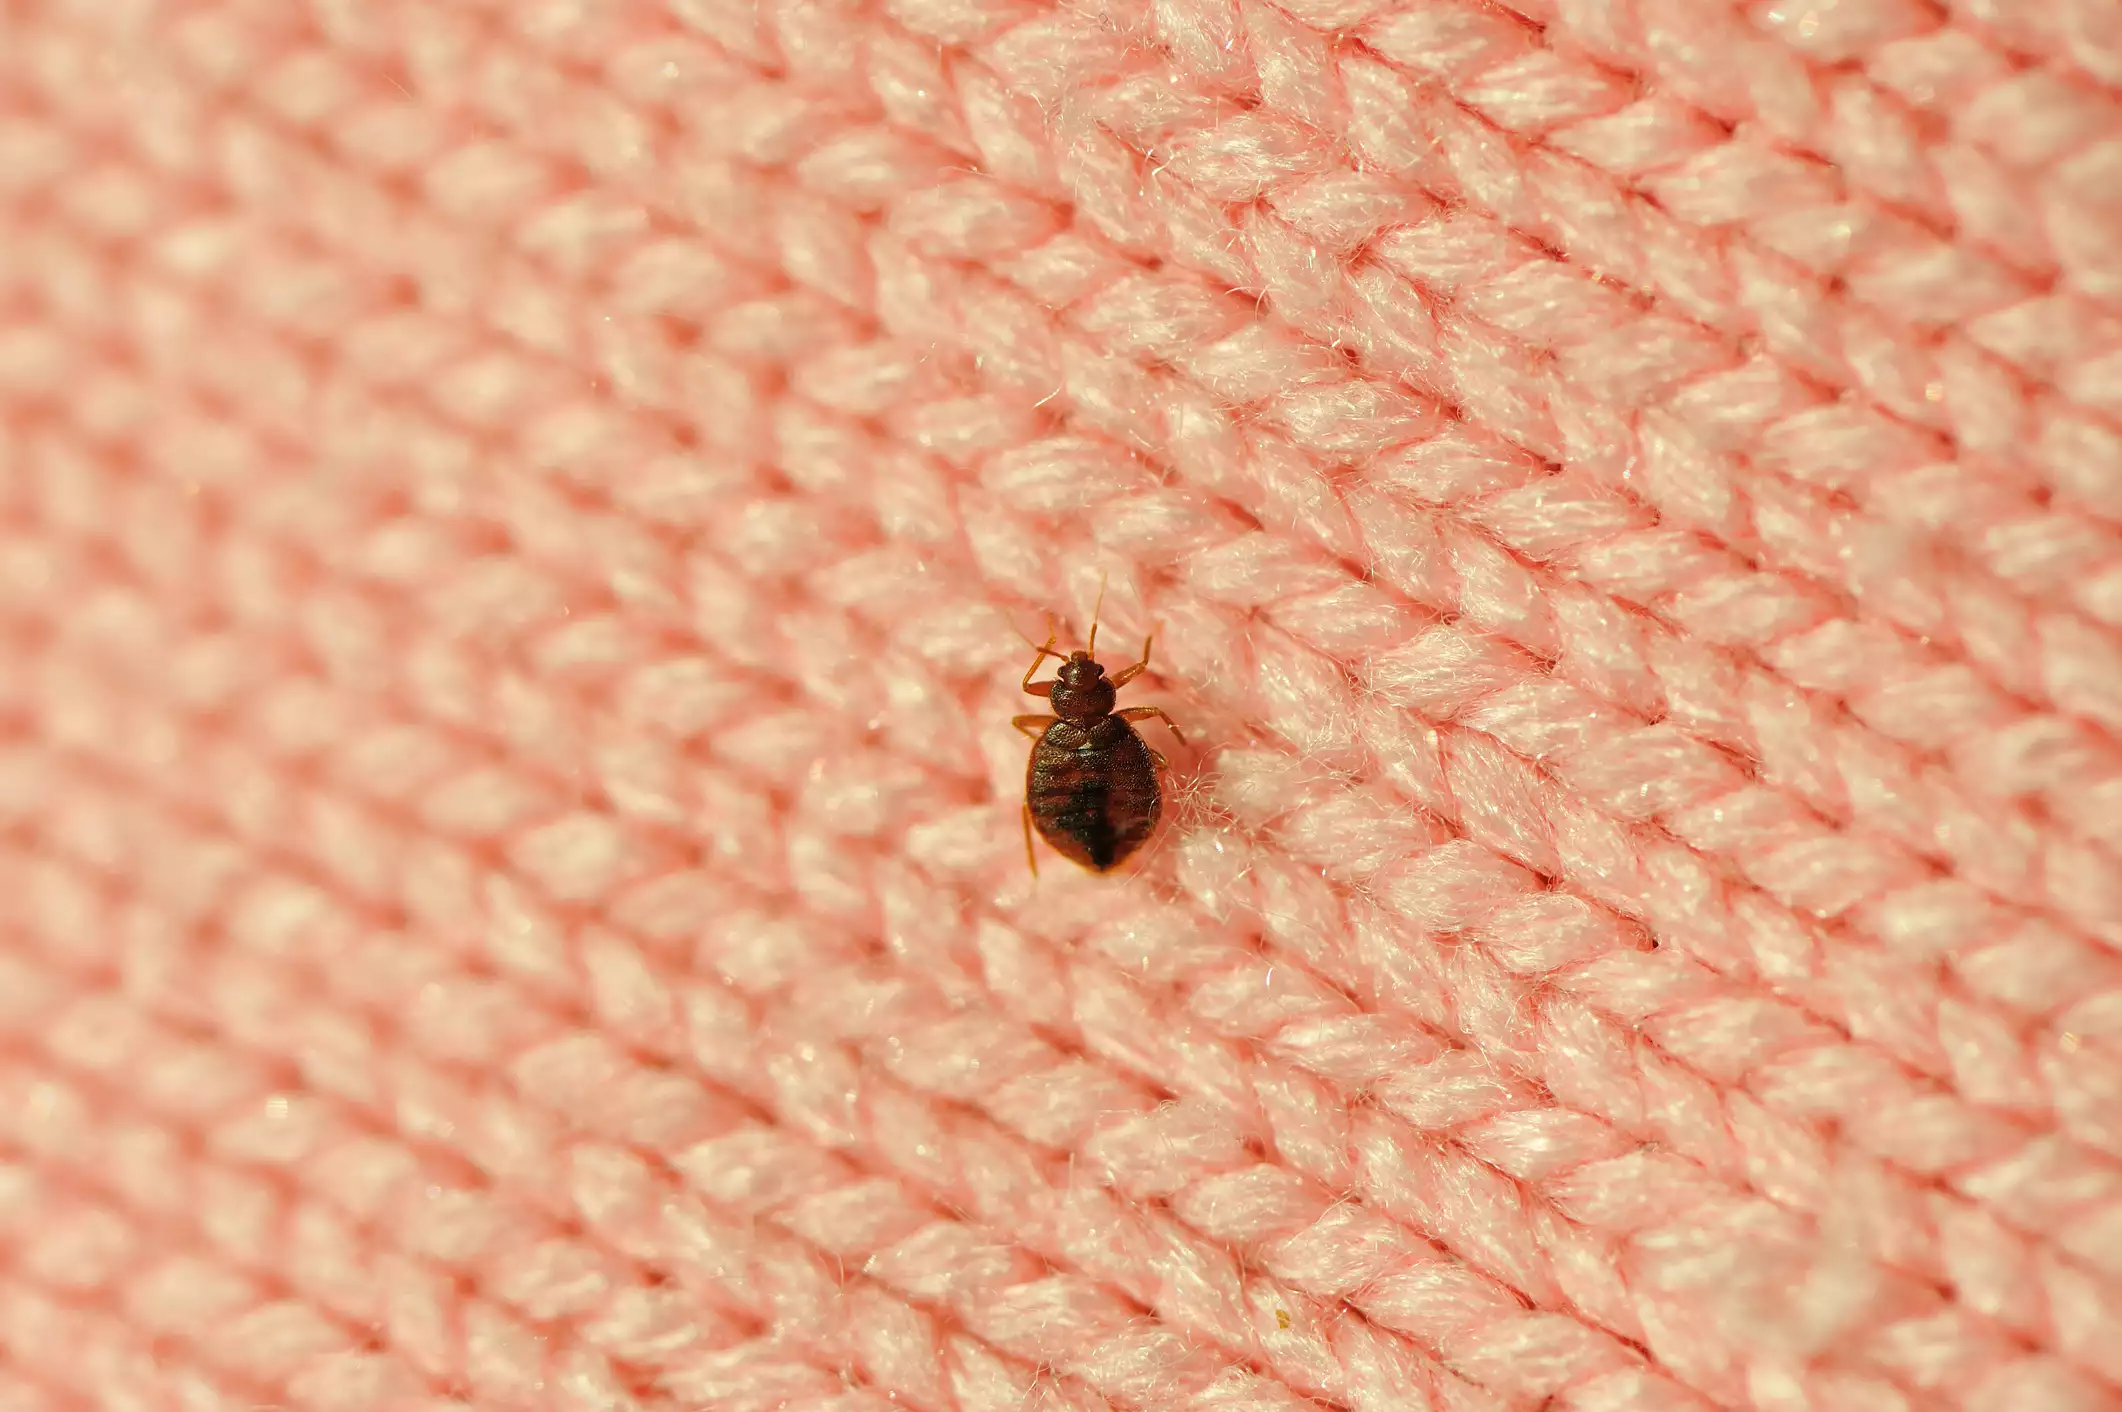 A single bed bug on a piece of pink knit fabric